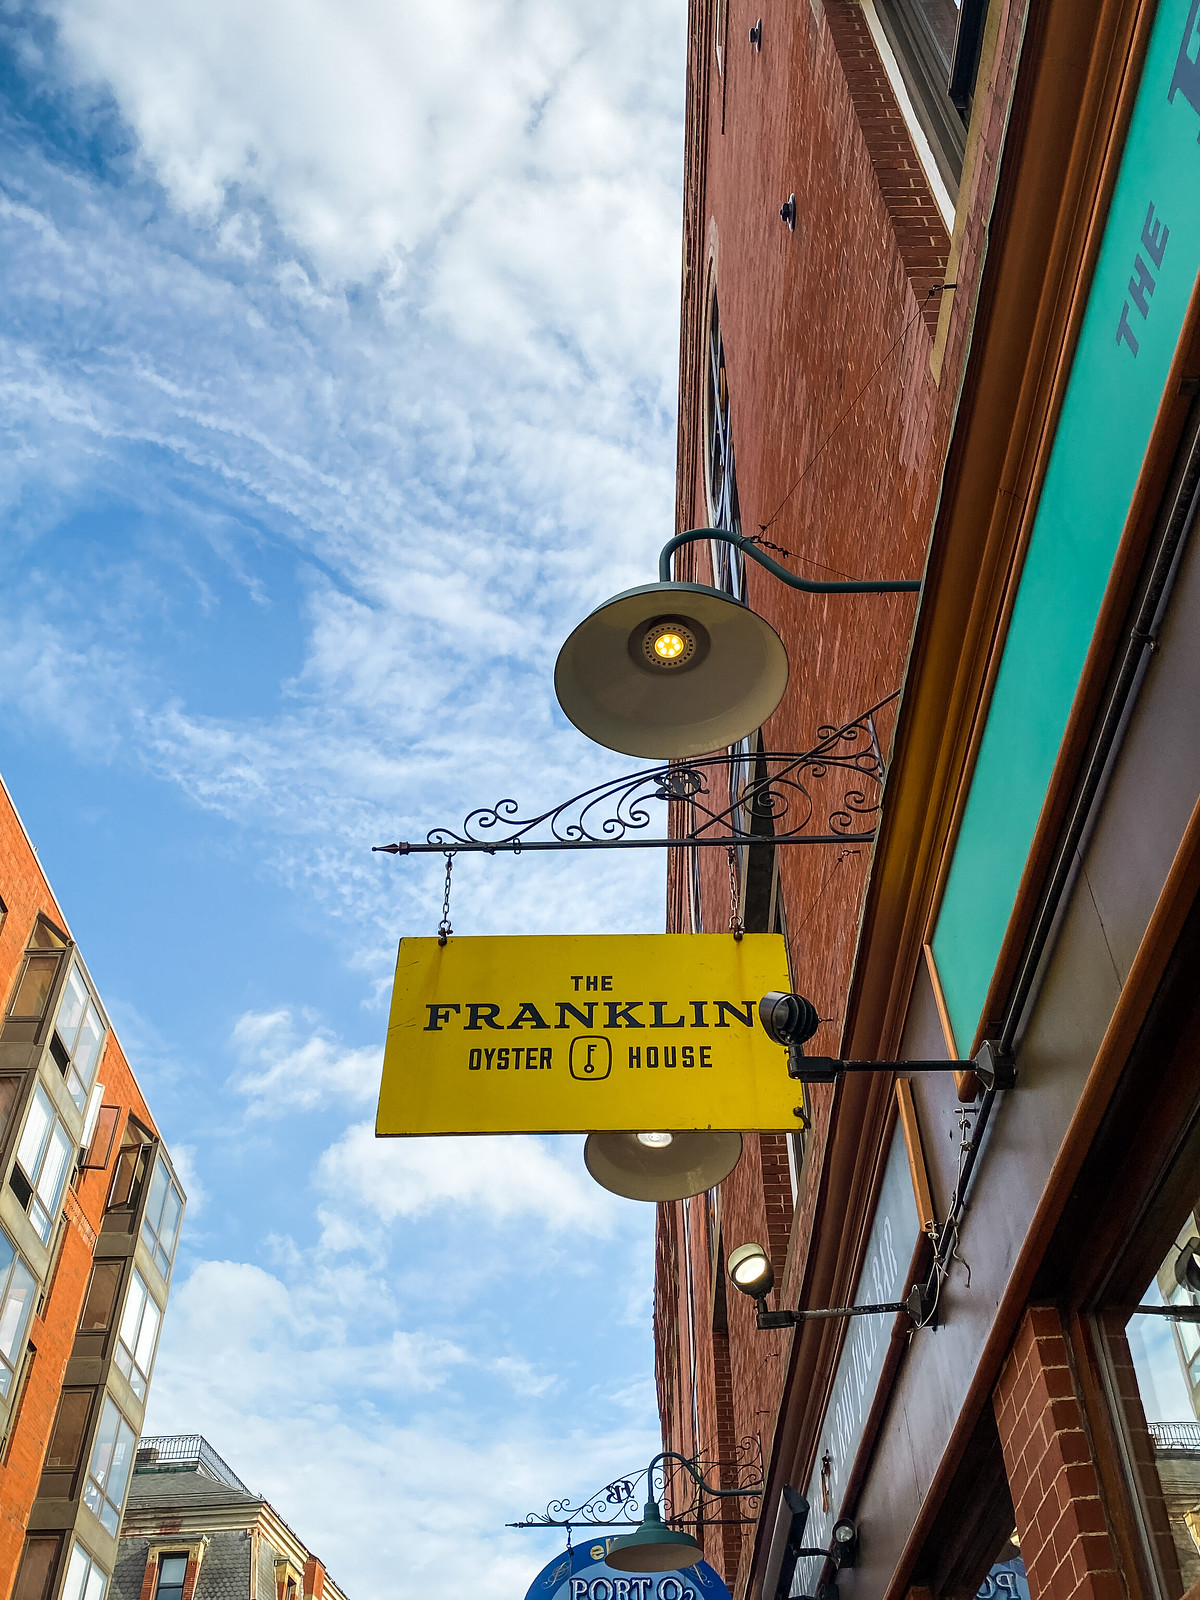 The Franklin Restaurant | Portsmouth, New Hampshire | New England Road Trip Itinerary - New England Road Trip - The Ultimate 7 Day Itinerary - The Perfect Summer New England Road Trip Itinerary